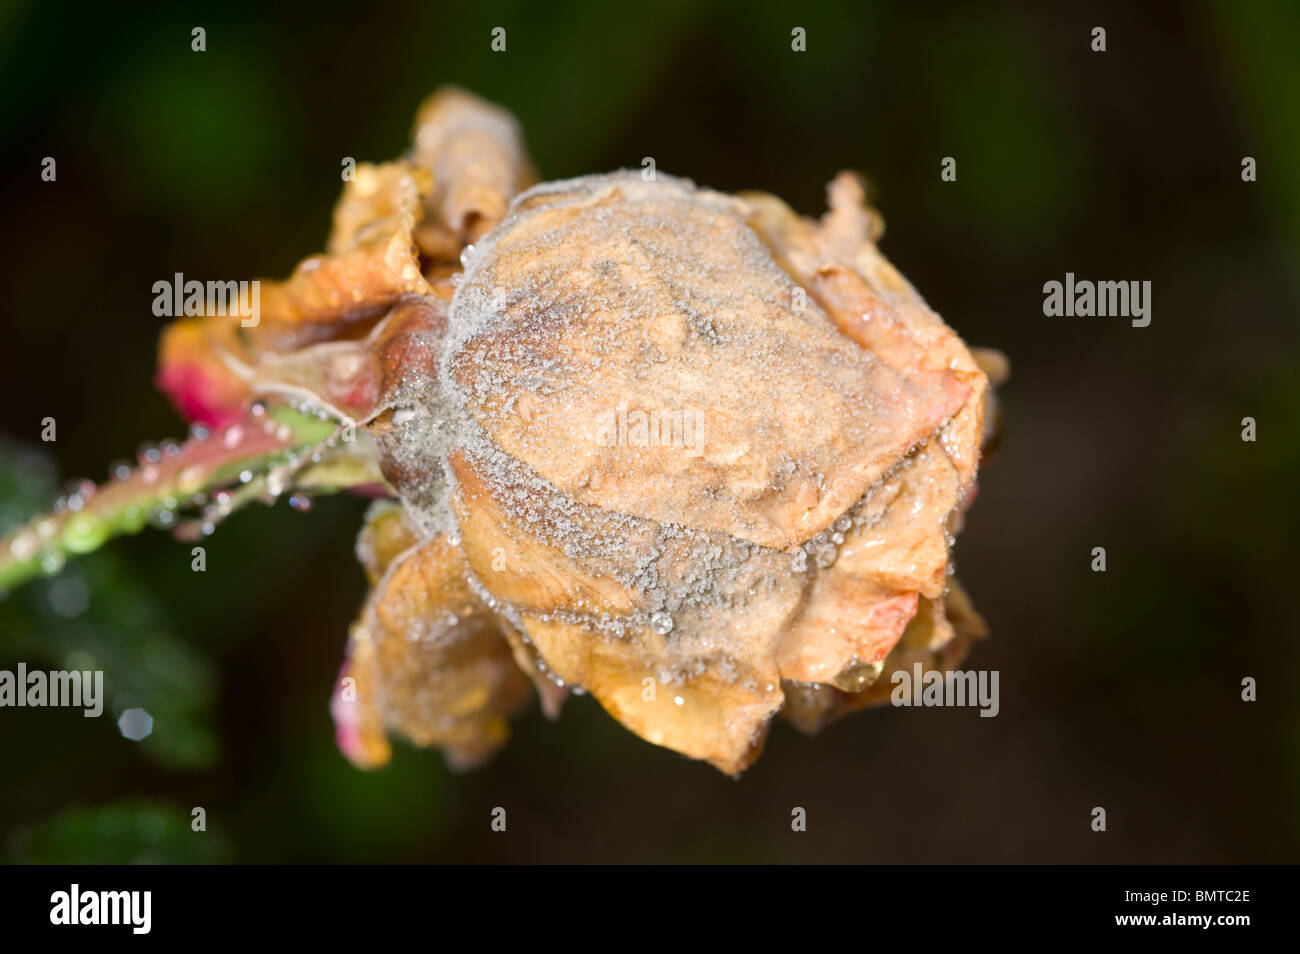 Grey mould fungus on rose bud Stock Photo